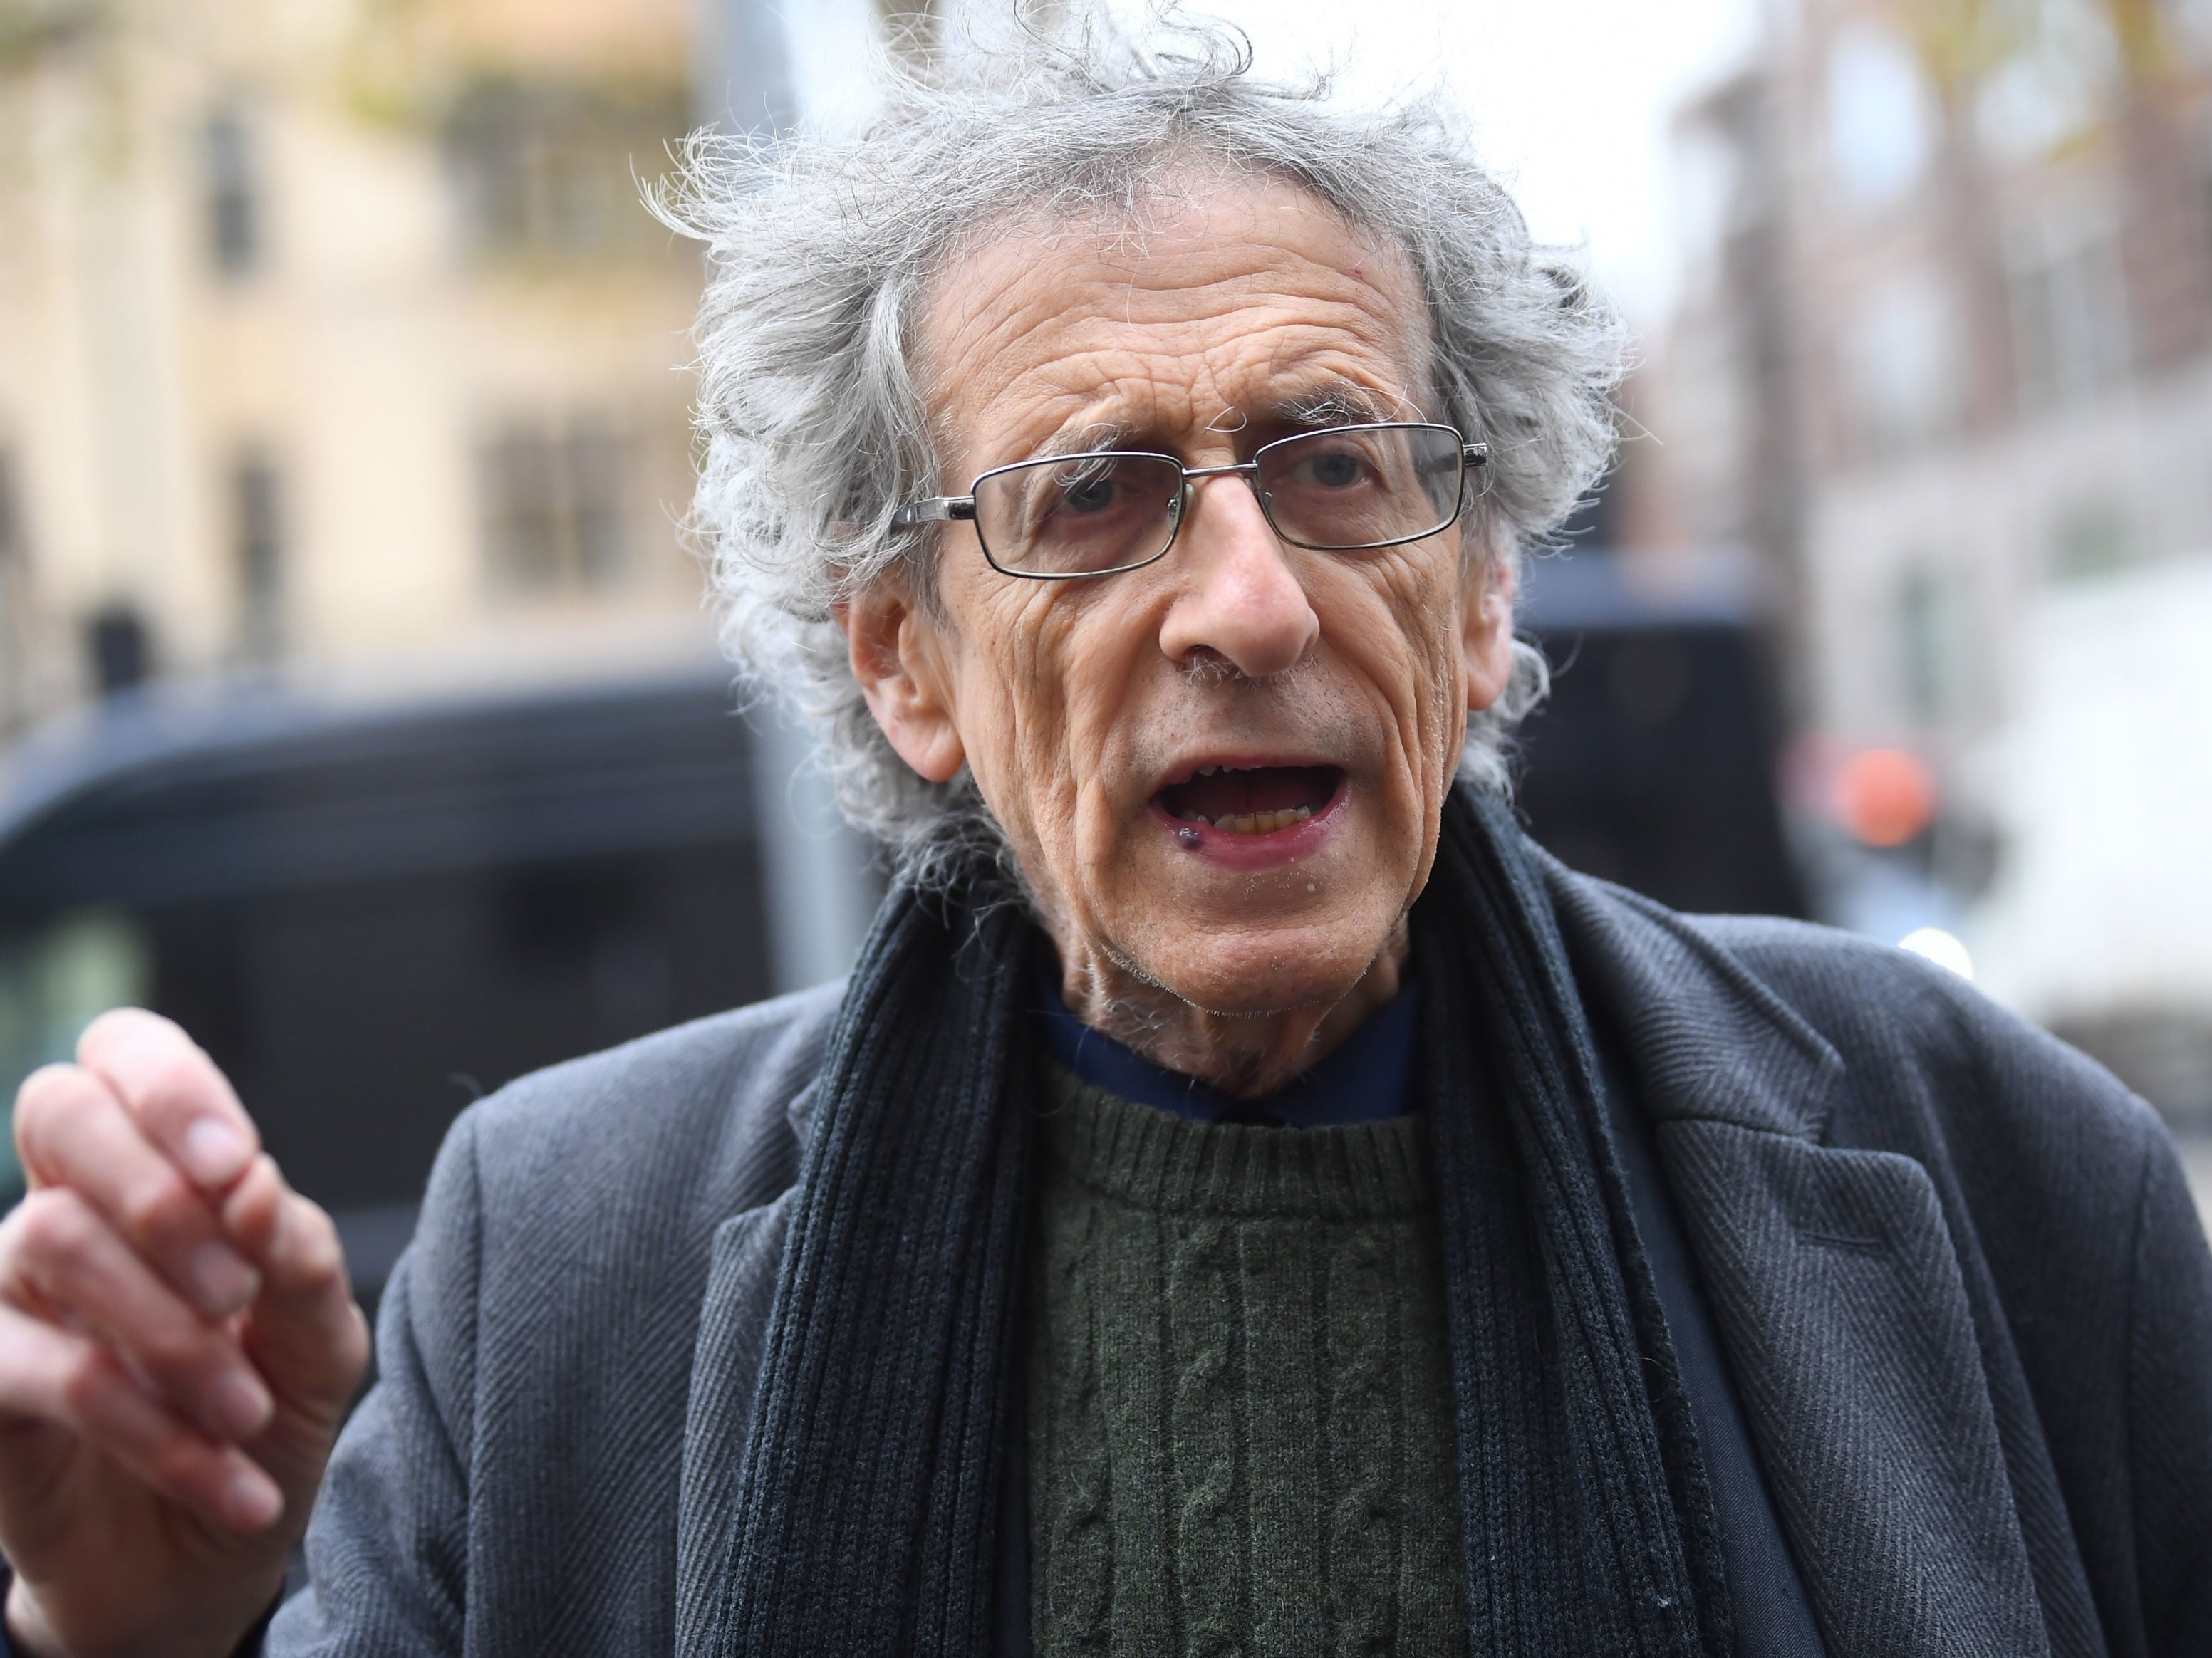 Piers Corbyn is the elder brother of ex-Labour leader Jeremy Corbyn